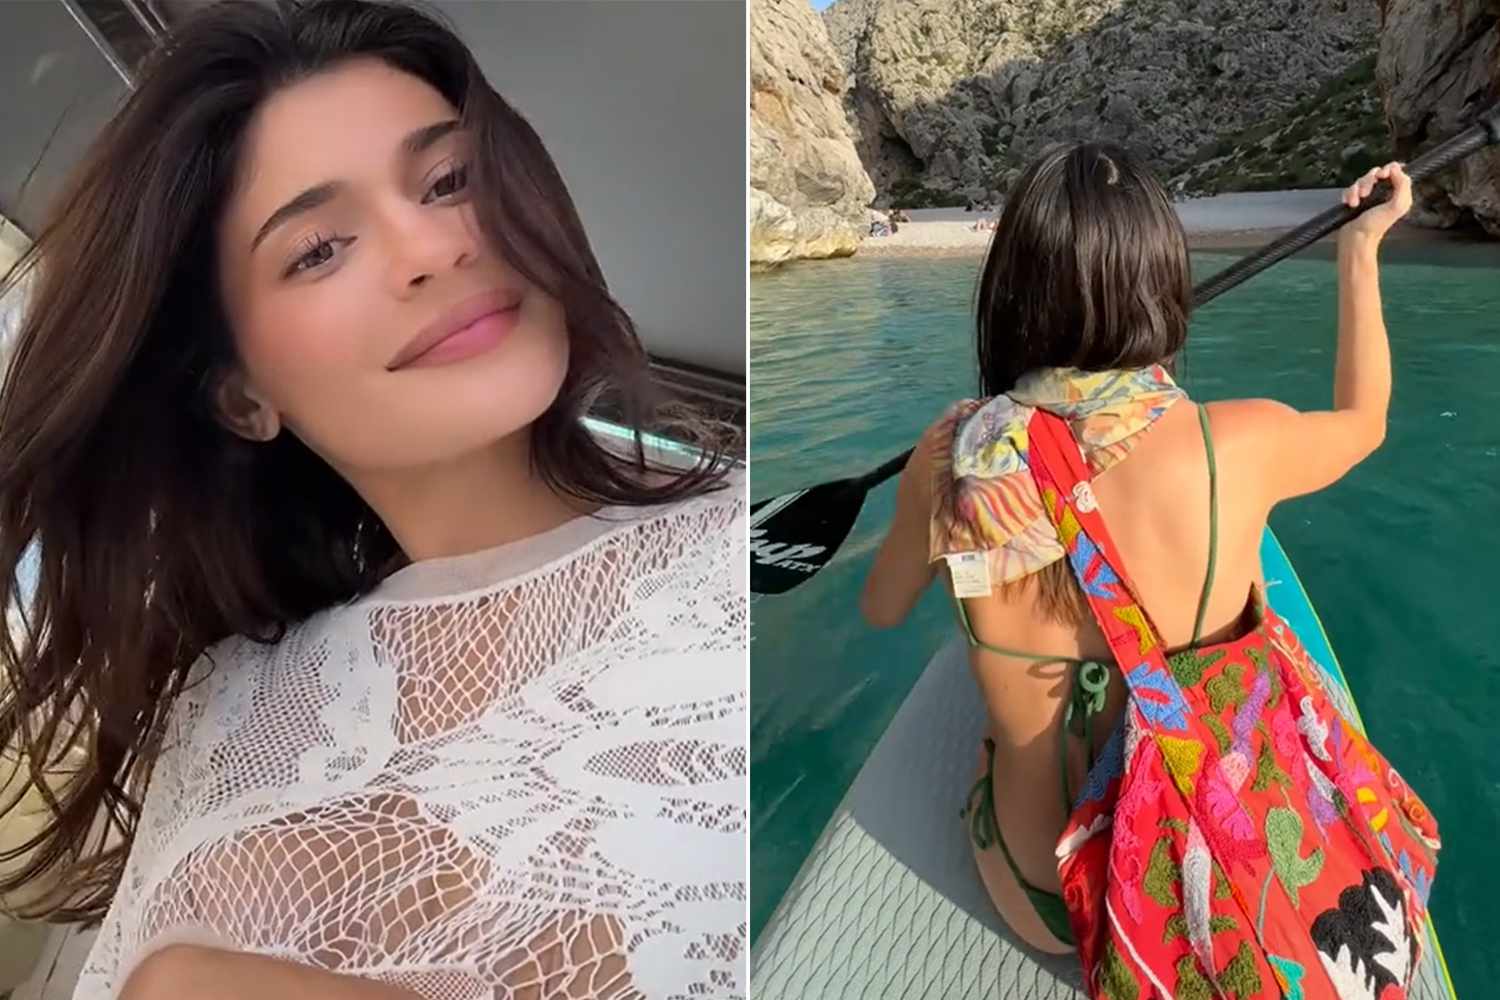 Kendall and Kylie Jenner Share a Video of Their 'Sister Adventures' as They Go Paddleboarding in Spain